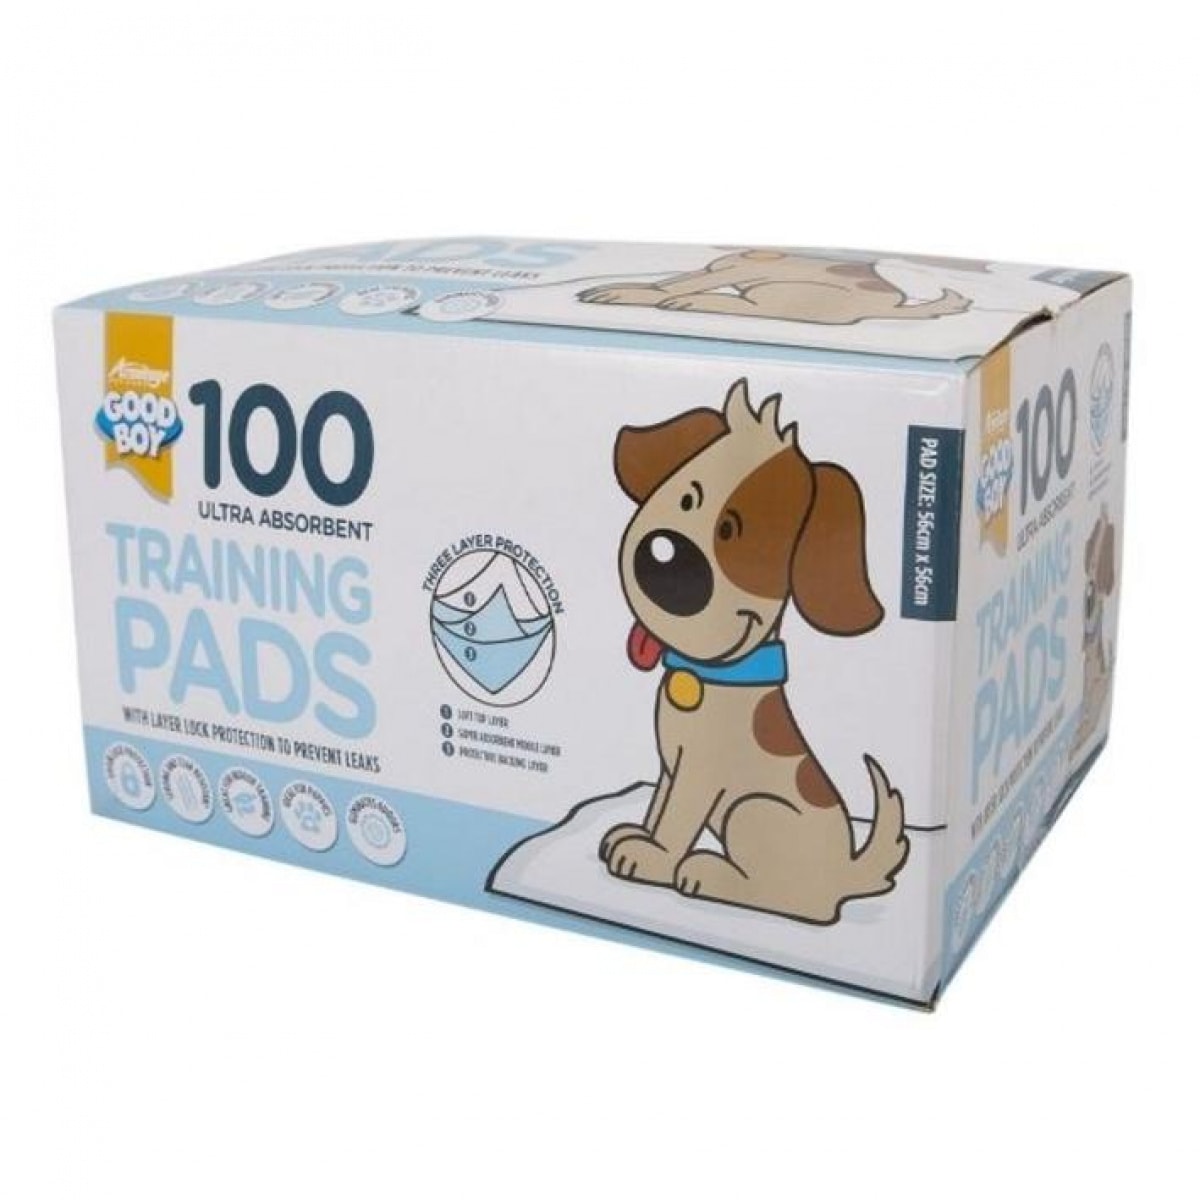 GoodBoy – Puppy Training Pads 100pk – Pawfect Supplies Ltd Product Image